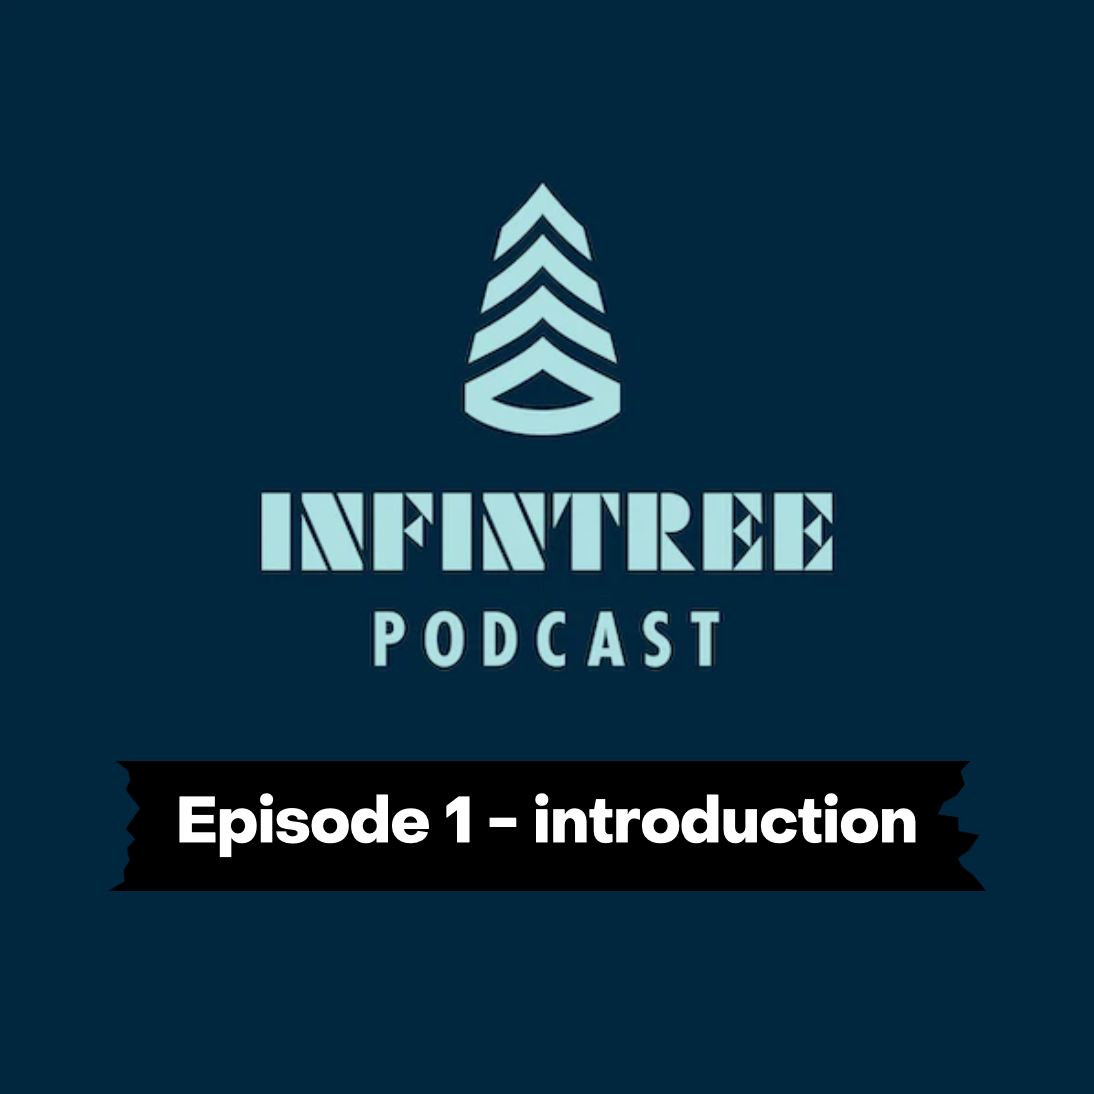 Infintree Podcast for Infinity Surfboards